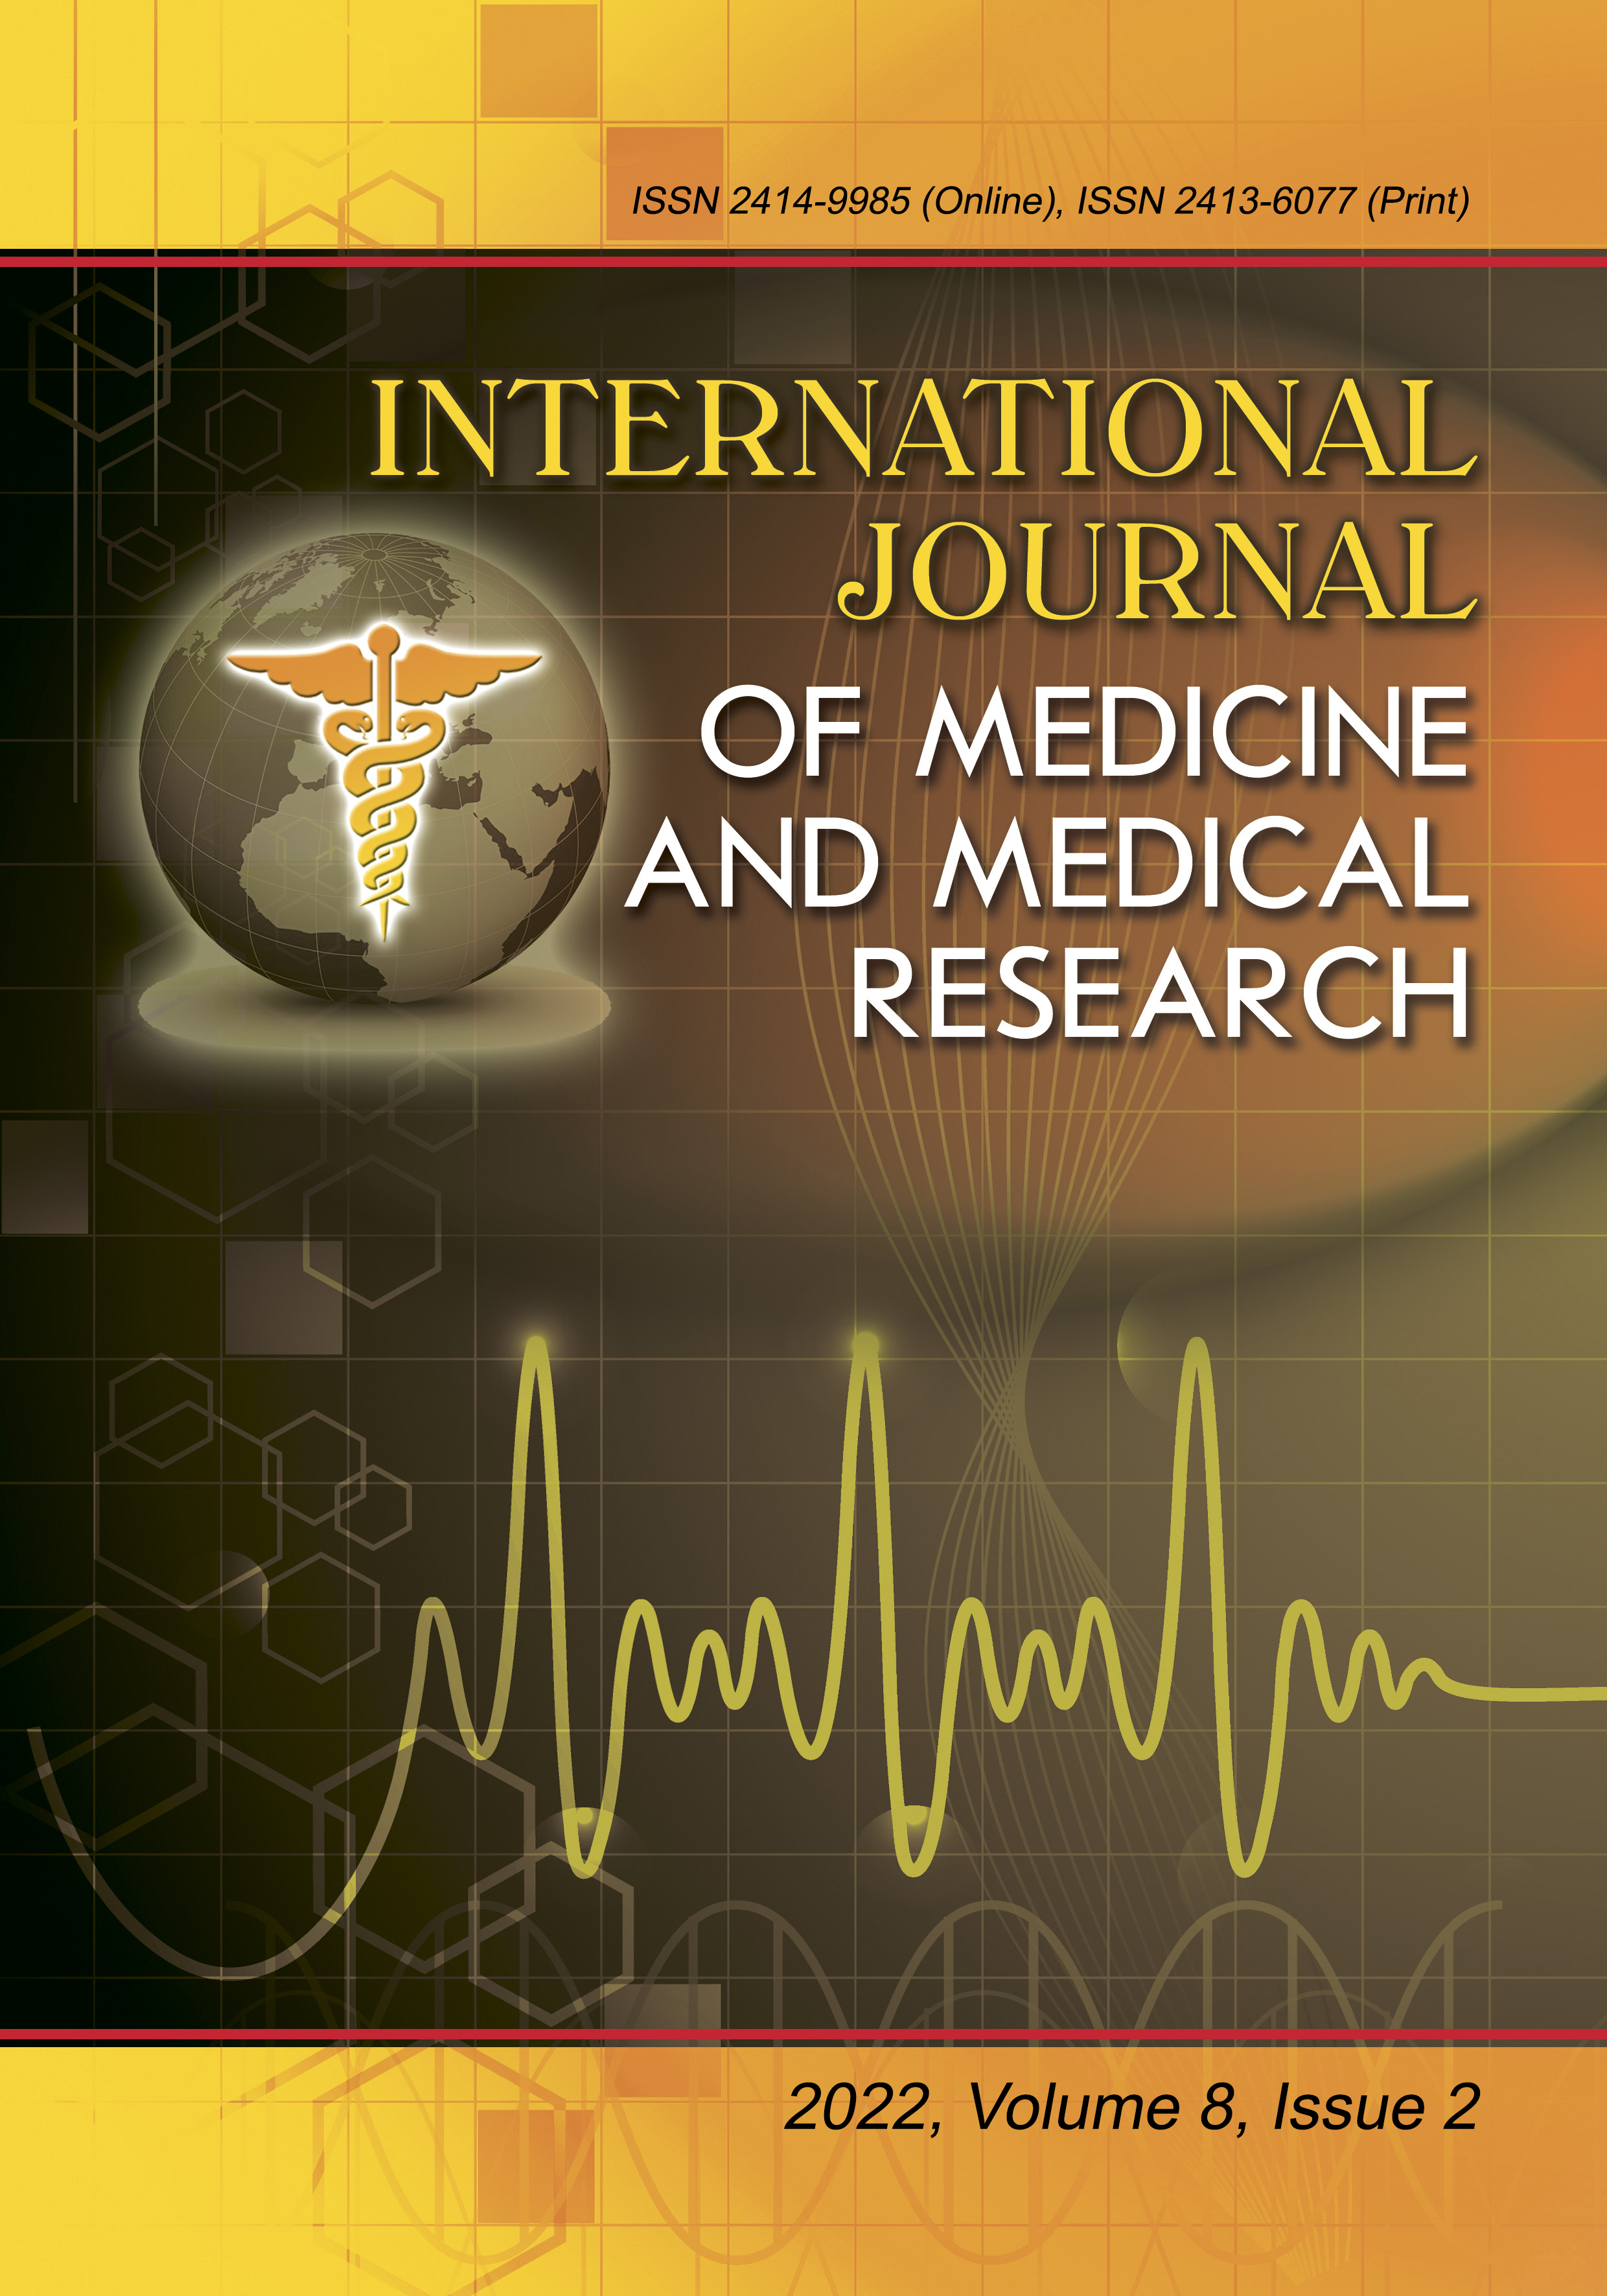 					View Vol. 8 No. 2 (2022): International Journal of Medicine and Medical Research
				